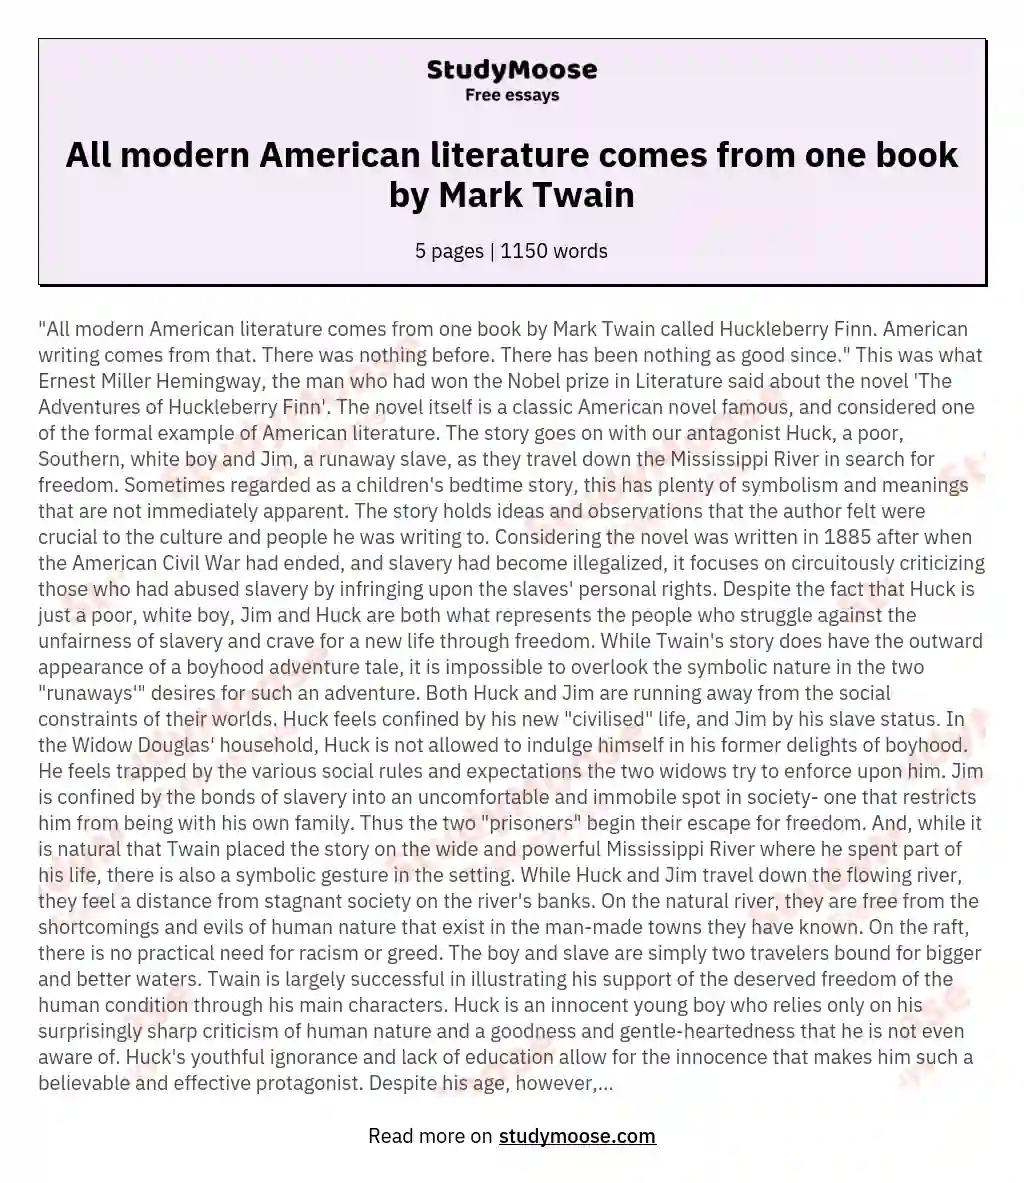 All modern American literature comes from one book by Mark Twain essay